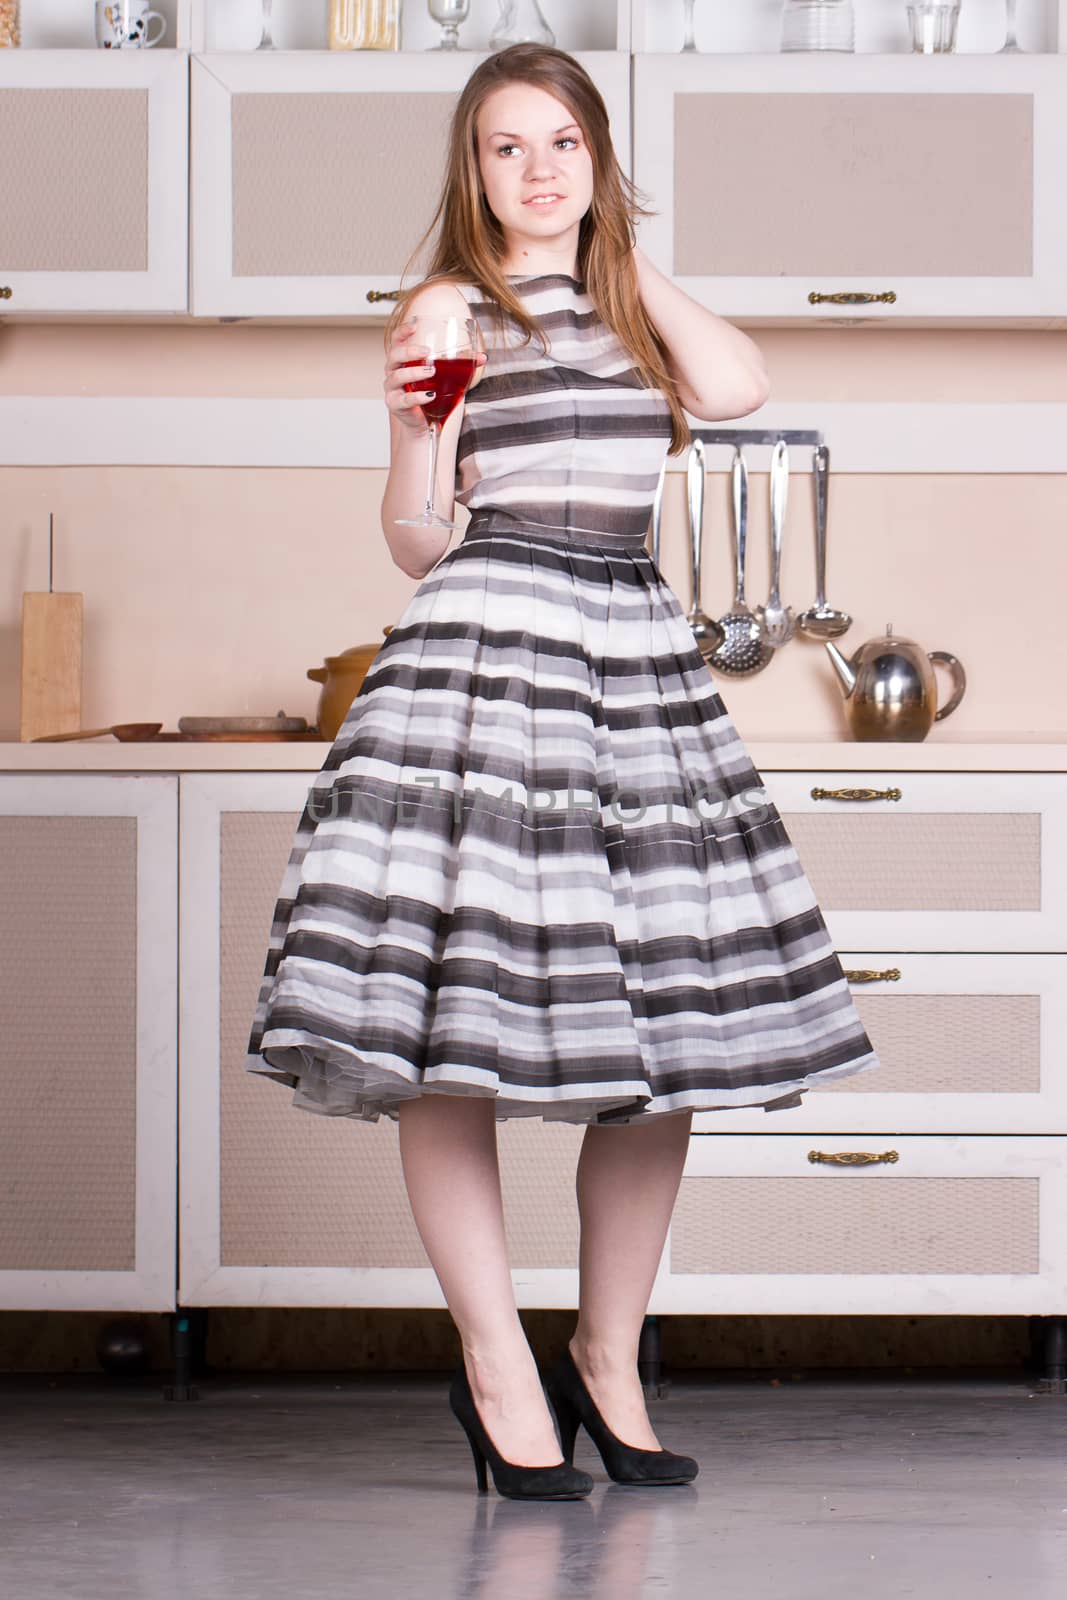 Attractive young woman in a dress holding a glass of wine in her kitchen.